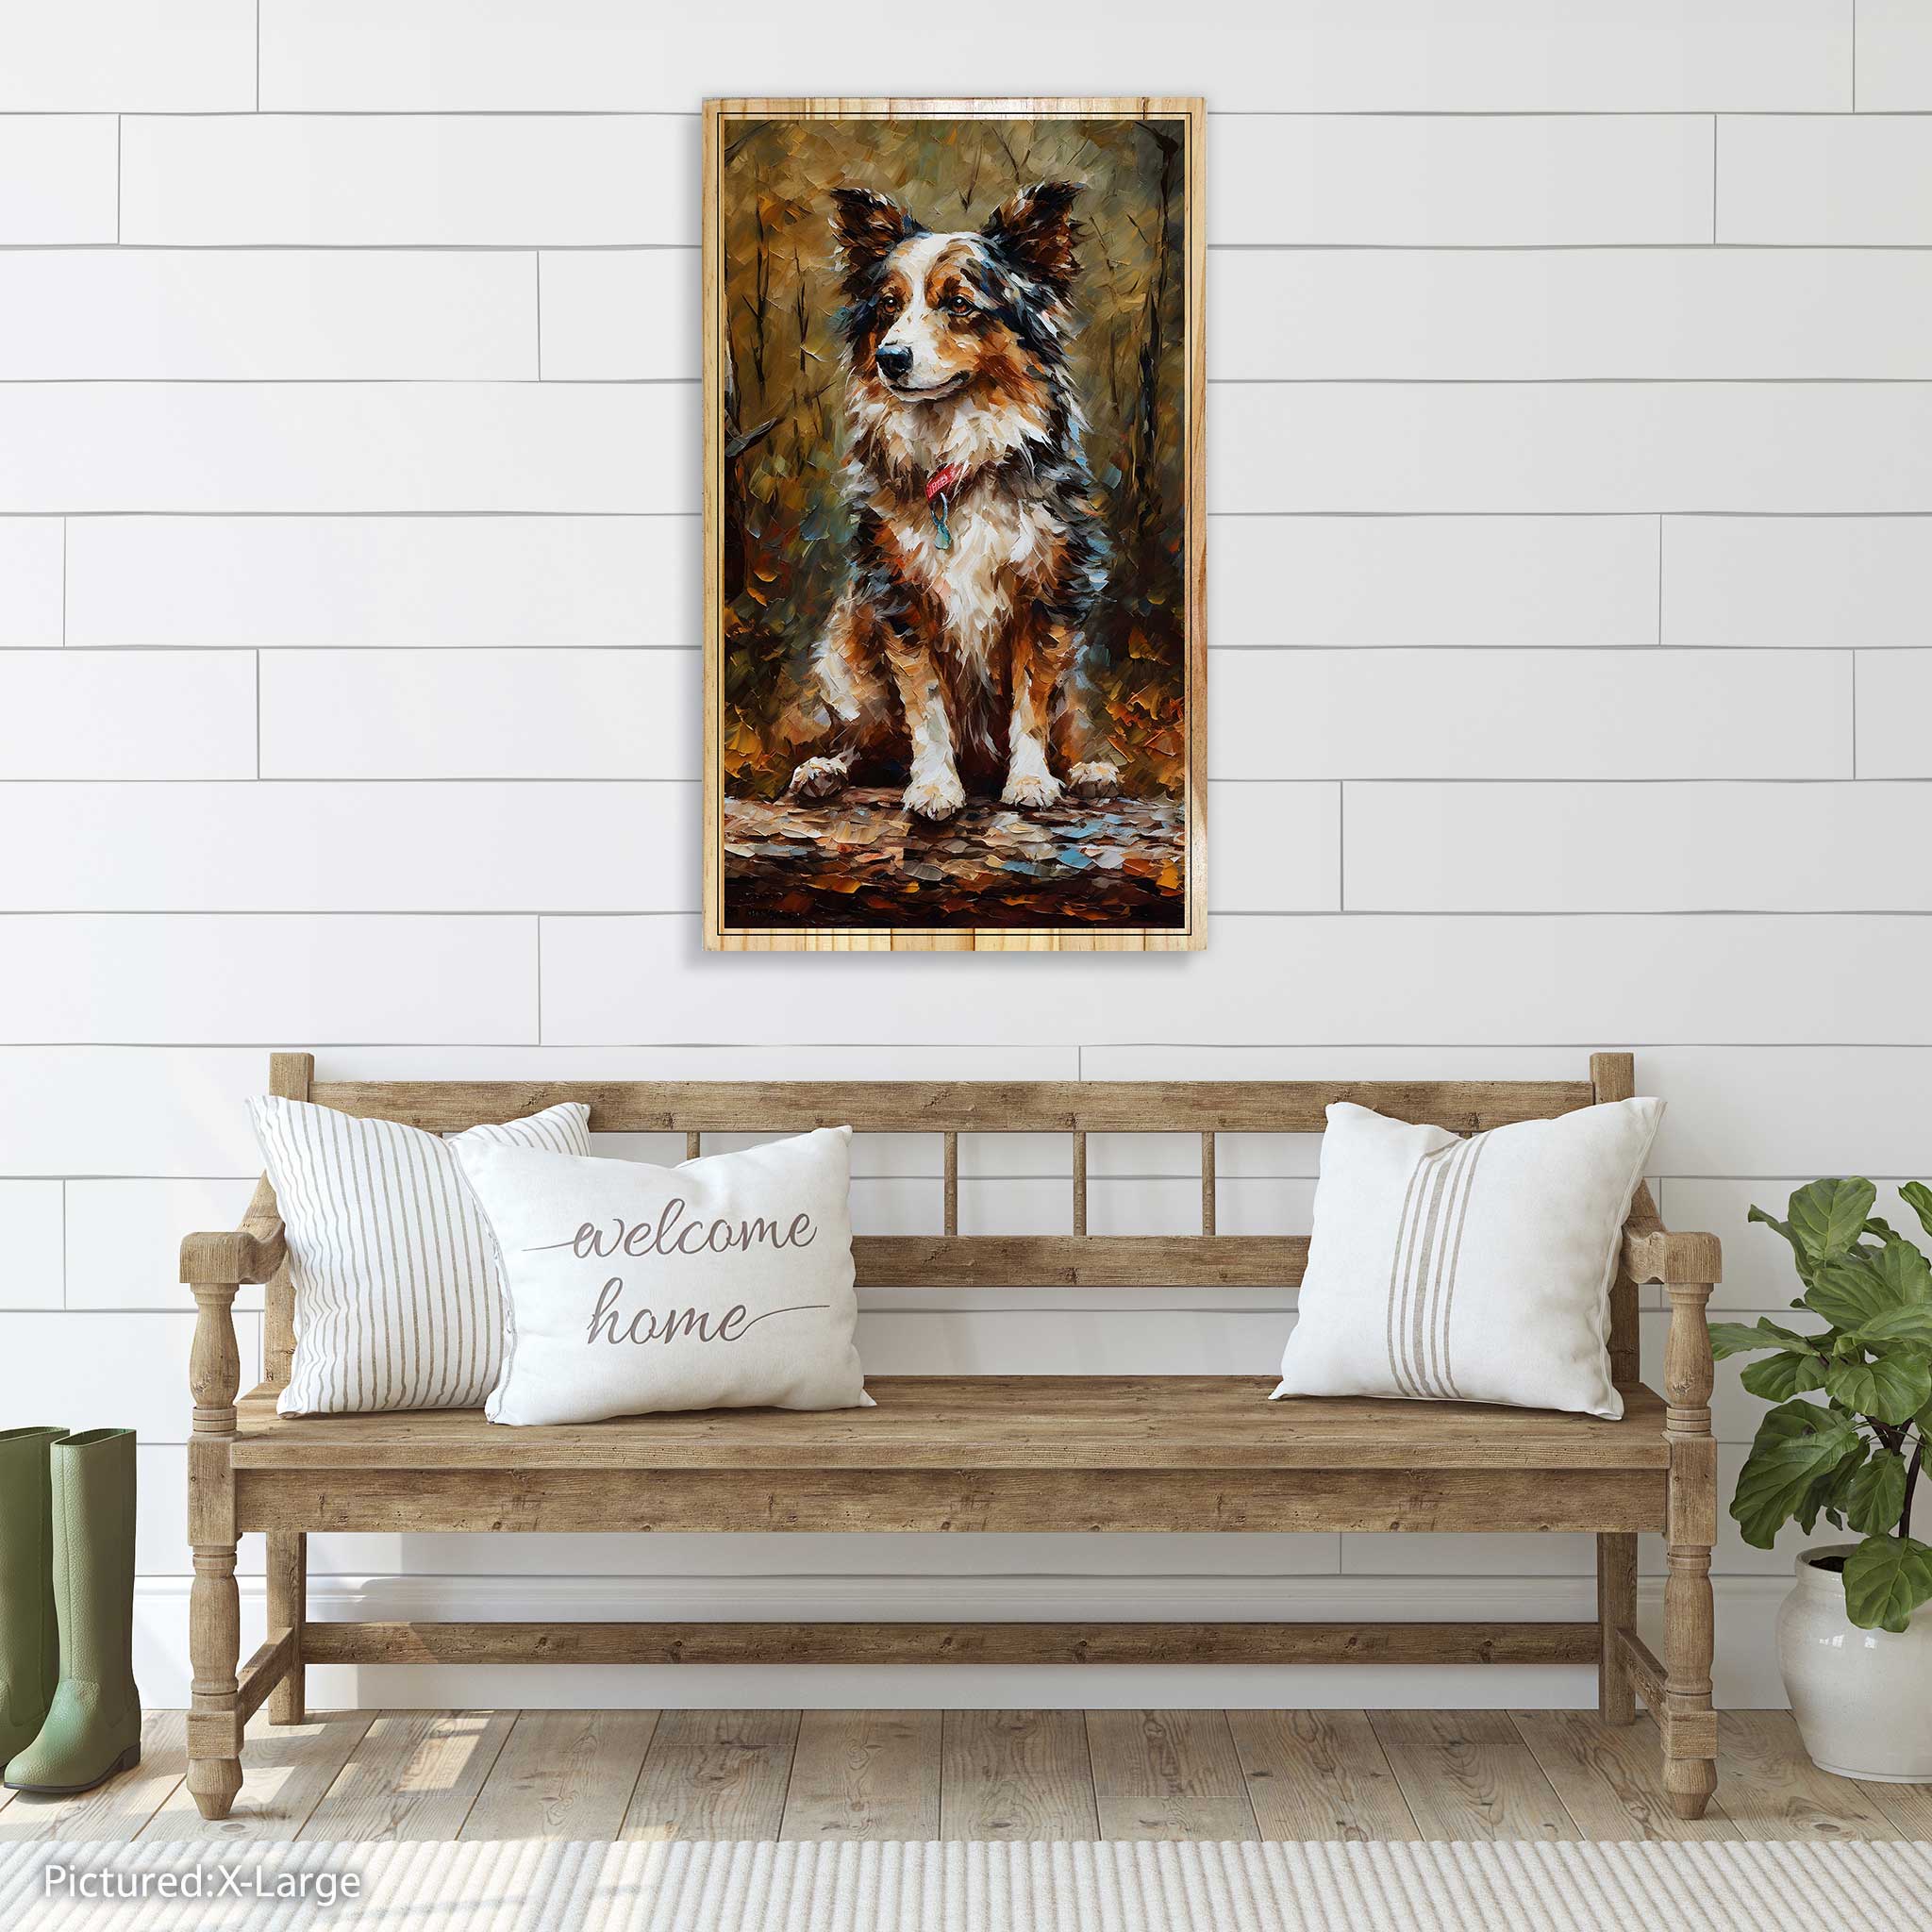 Impasto Oil Painting of an Aussie Cattle Dog